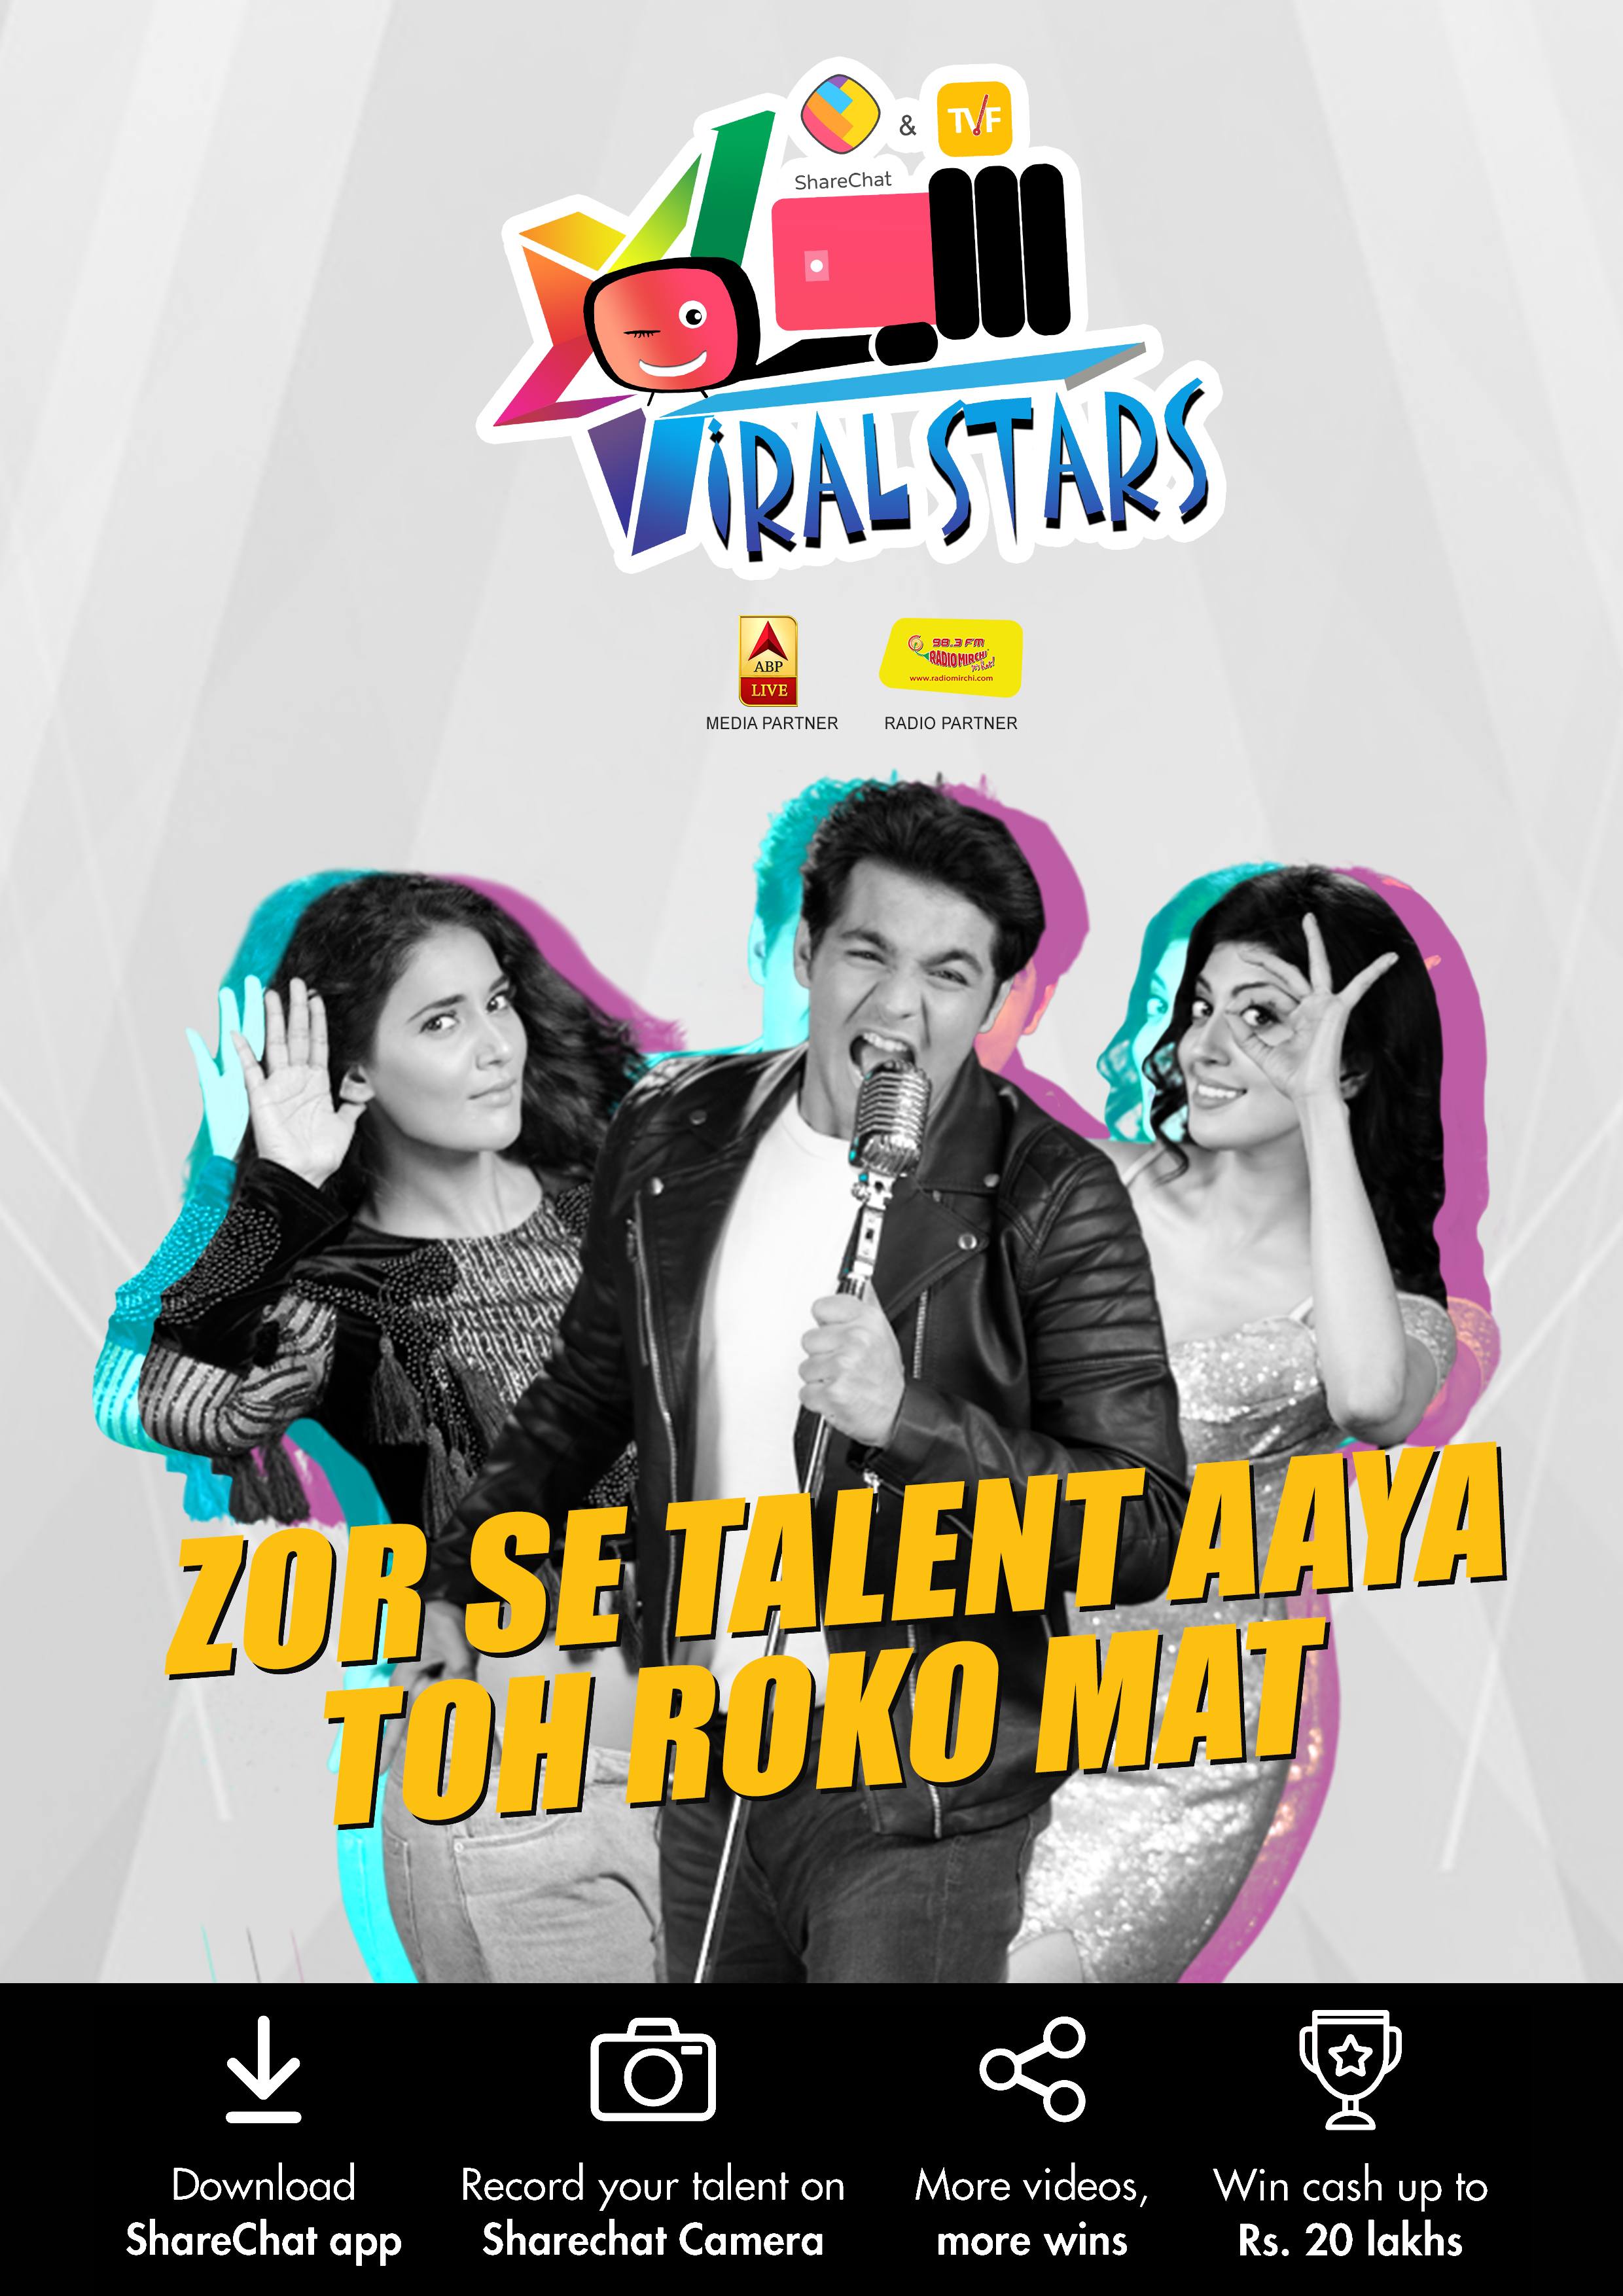 ABP Live comes on board as digital partner for TVF’s Viral Stars